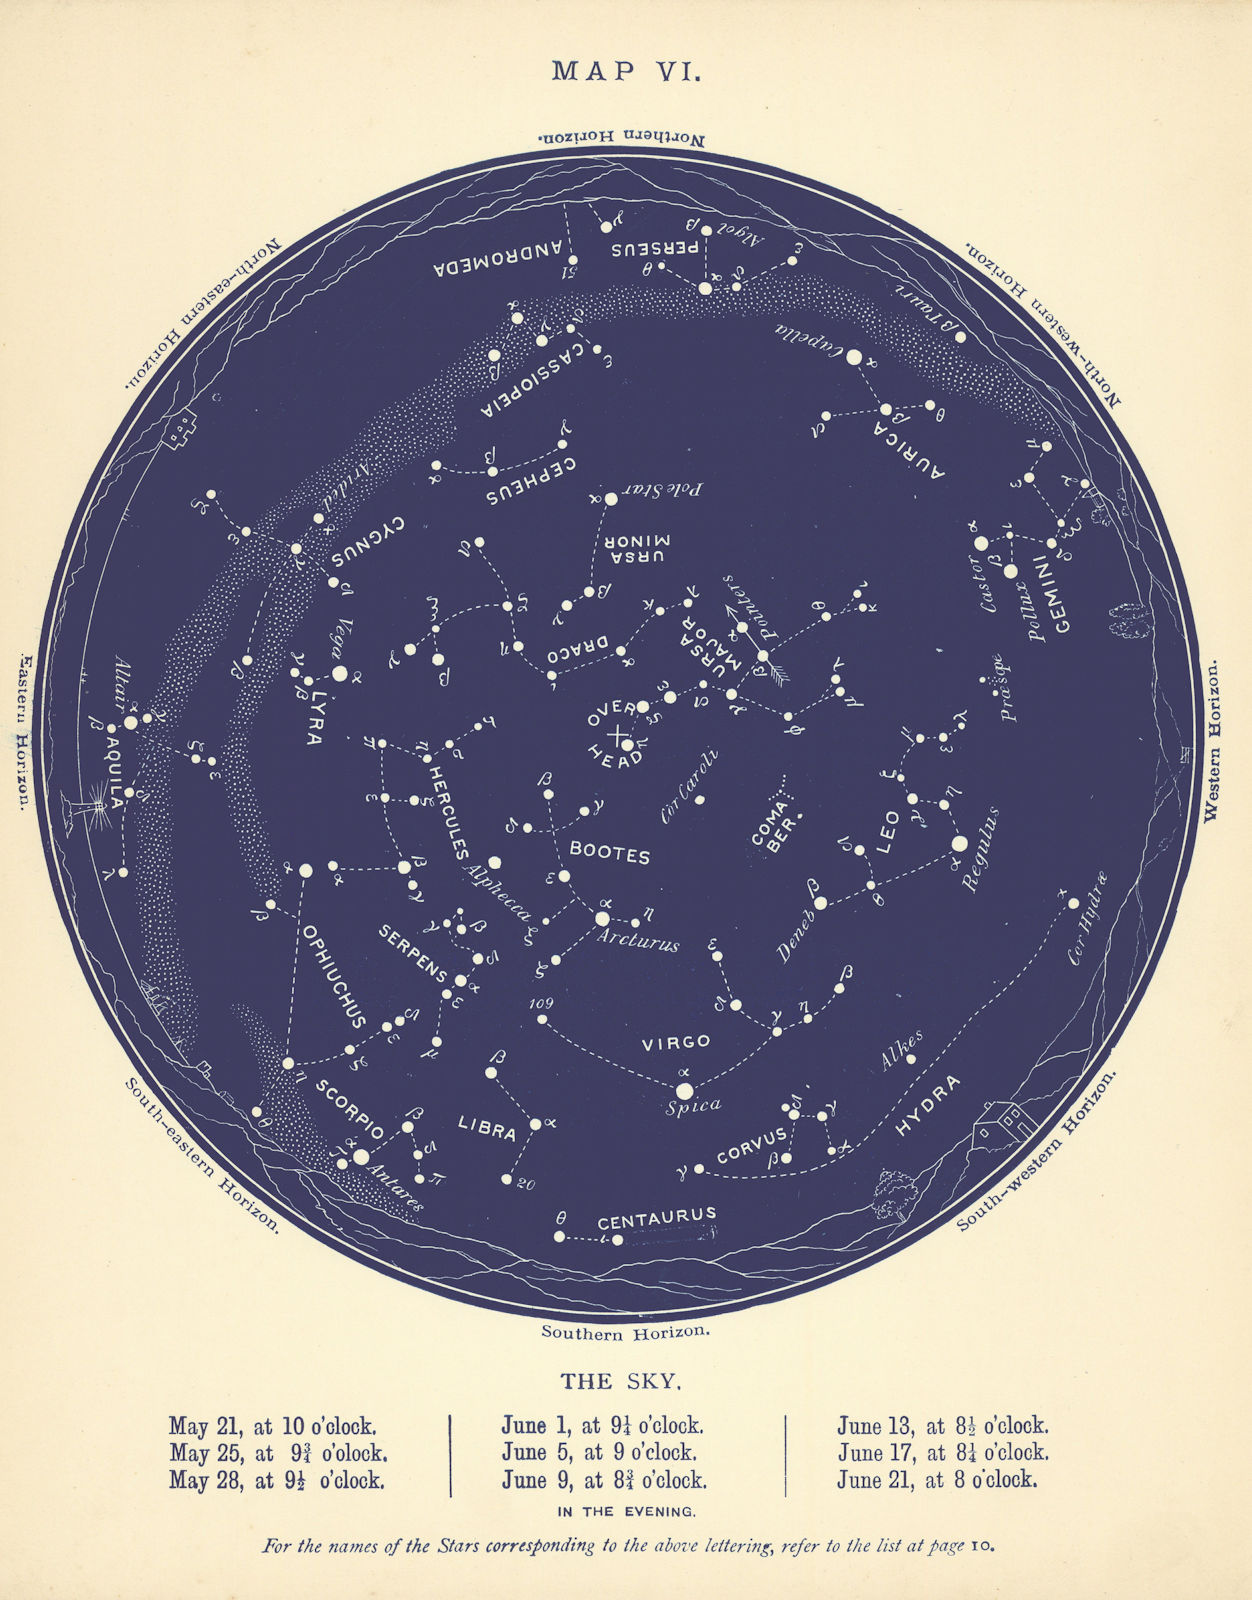 Associate Product STAR MAP VI. The Night Sky. May-June. Astronomy. PROCTOR 1896 old antique